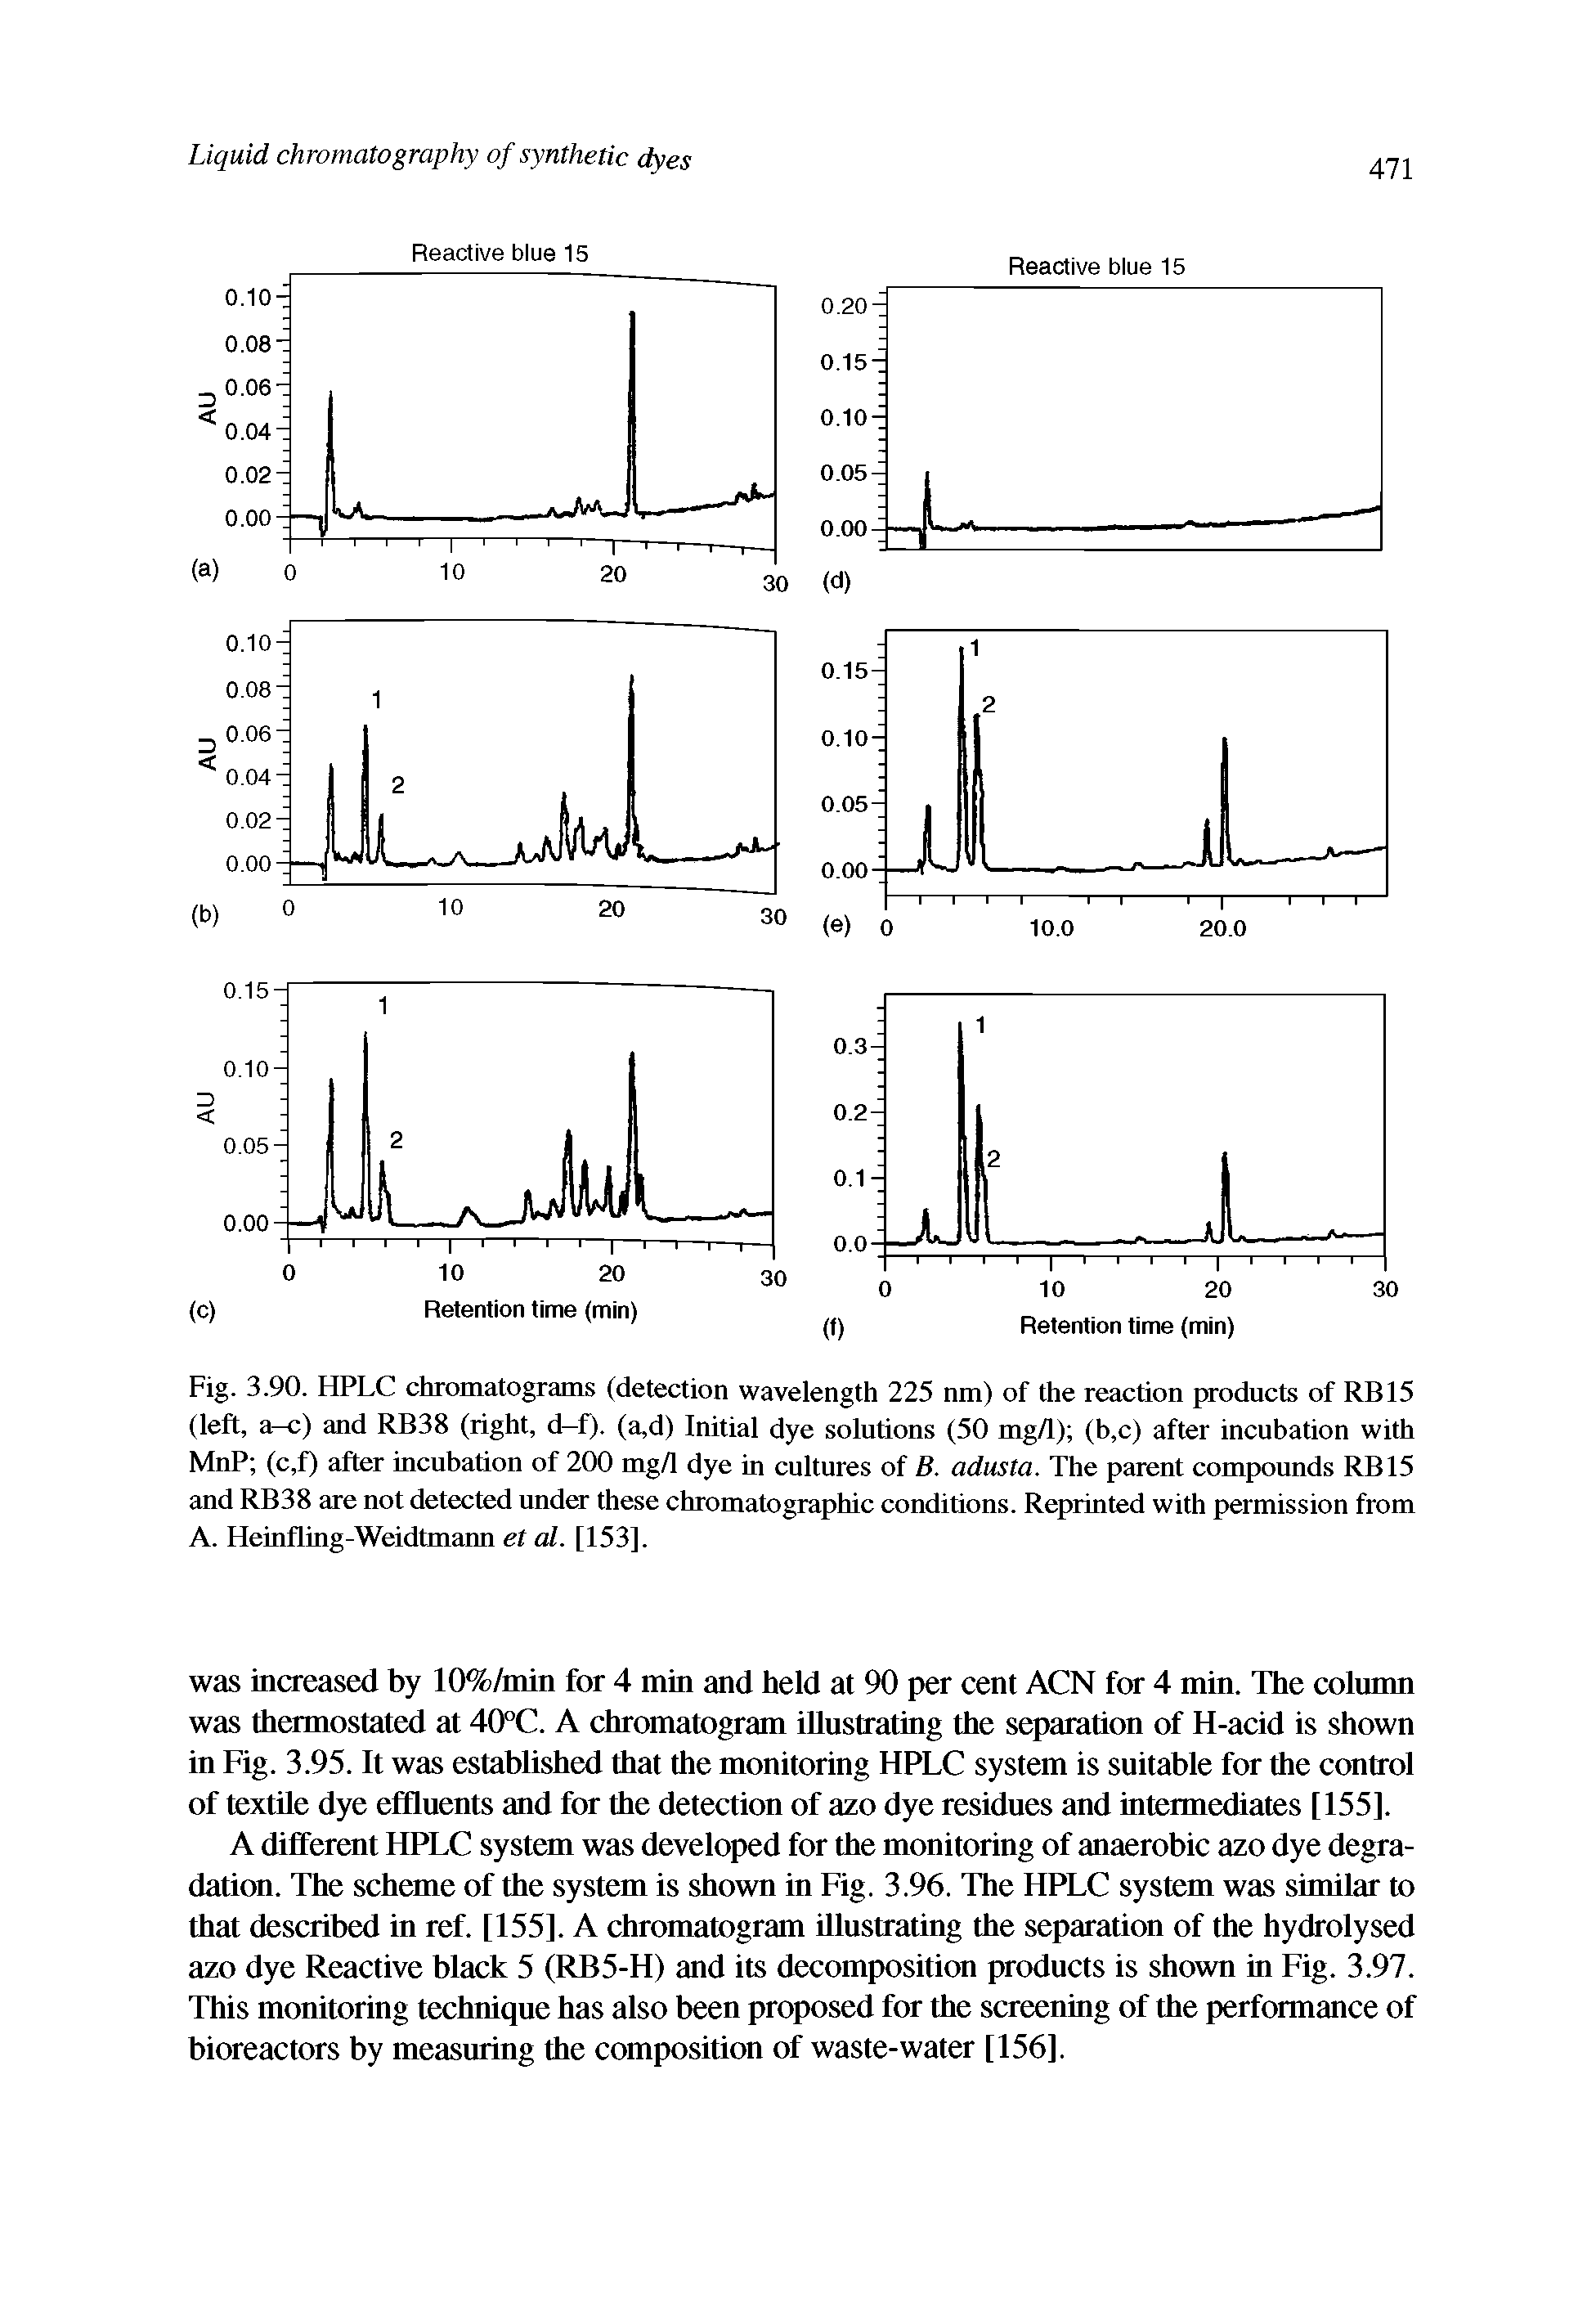 Fig. 3.90. HPLC chromatograms (detection wavelength 225 nm) of the reaction products of RB15 (left, a-c) and RB38 (right, d-f). (a,d) Initial dye solutions (50 mg/1) (b,c) after incubation with MnP (c,f) after incubation of 200 mg/1 dye in cultures of B. adusta. The parent compounds RB15 and RB38 are not detected under these chromatographic conditions. Reprinted with permission from A. Heinfling-Weidtmann et al. [153].